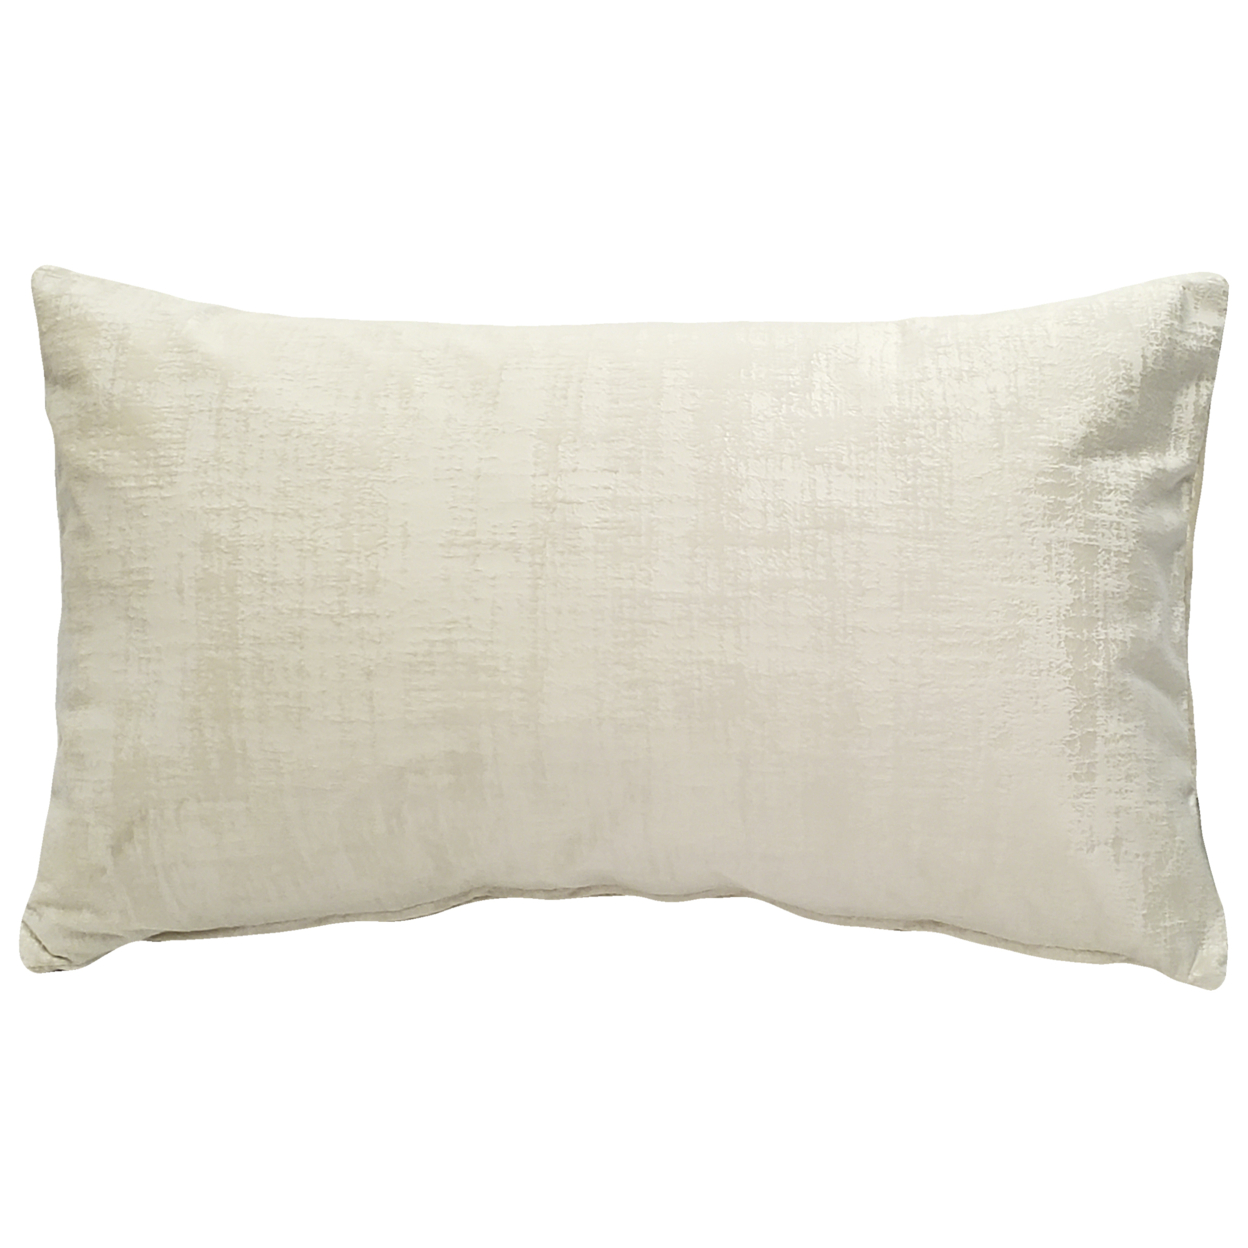 Alabaster Stucco Cream Throw Pillow 12x20, With Polyfill Insert